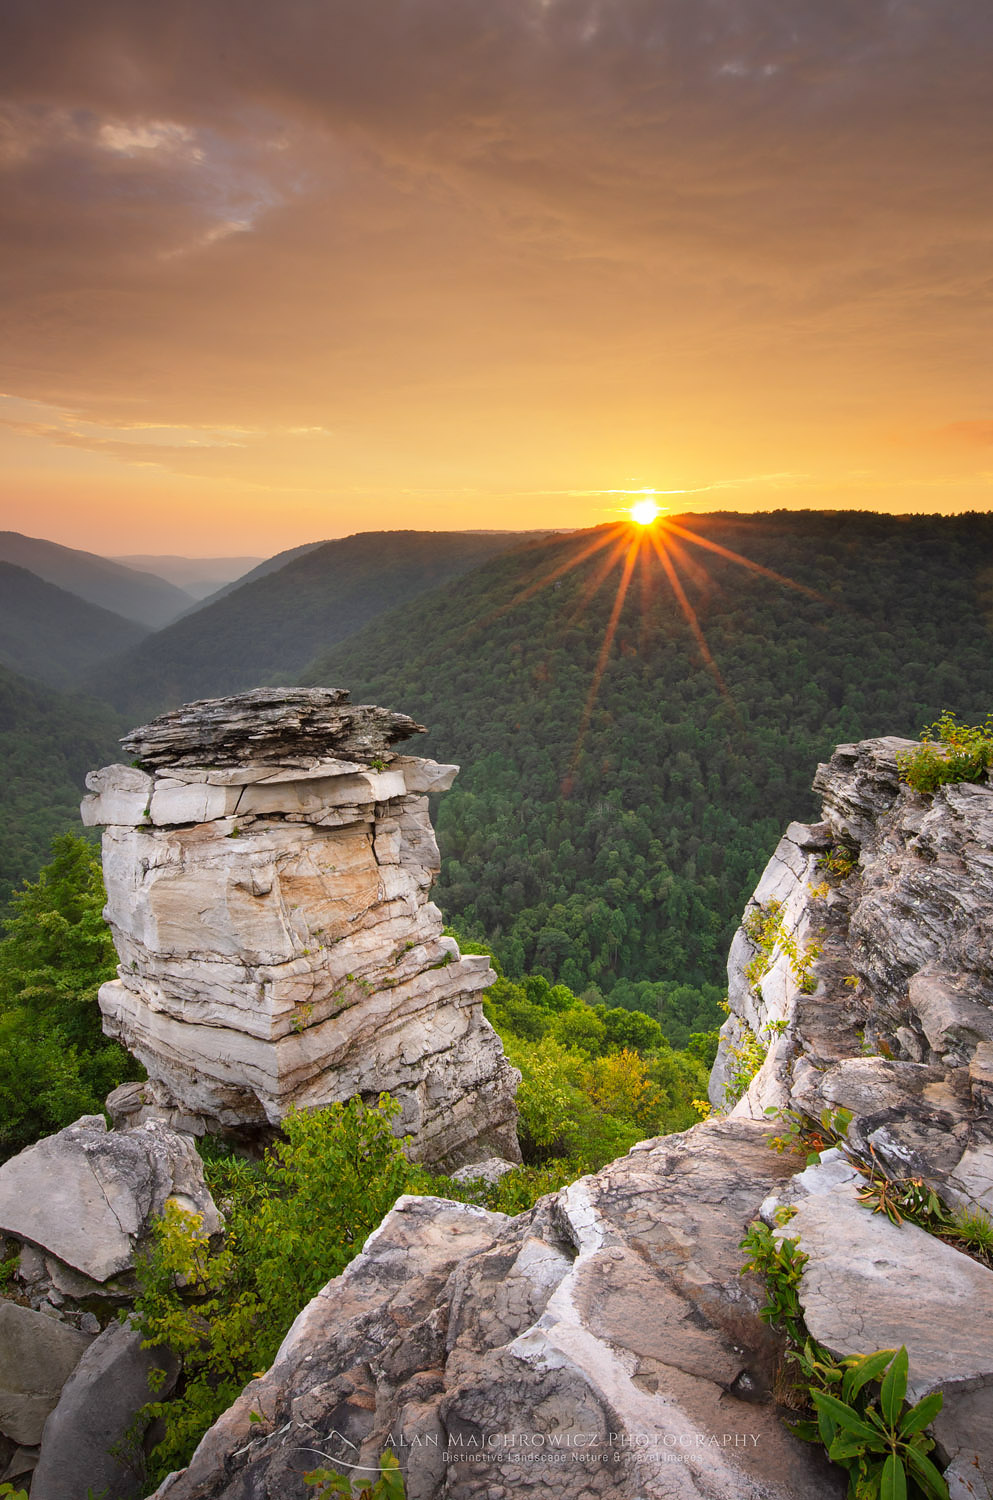 Sunset at Lindy Point Overlook, Blackwater Falls West Virginia #63427